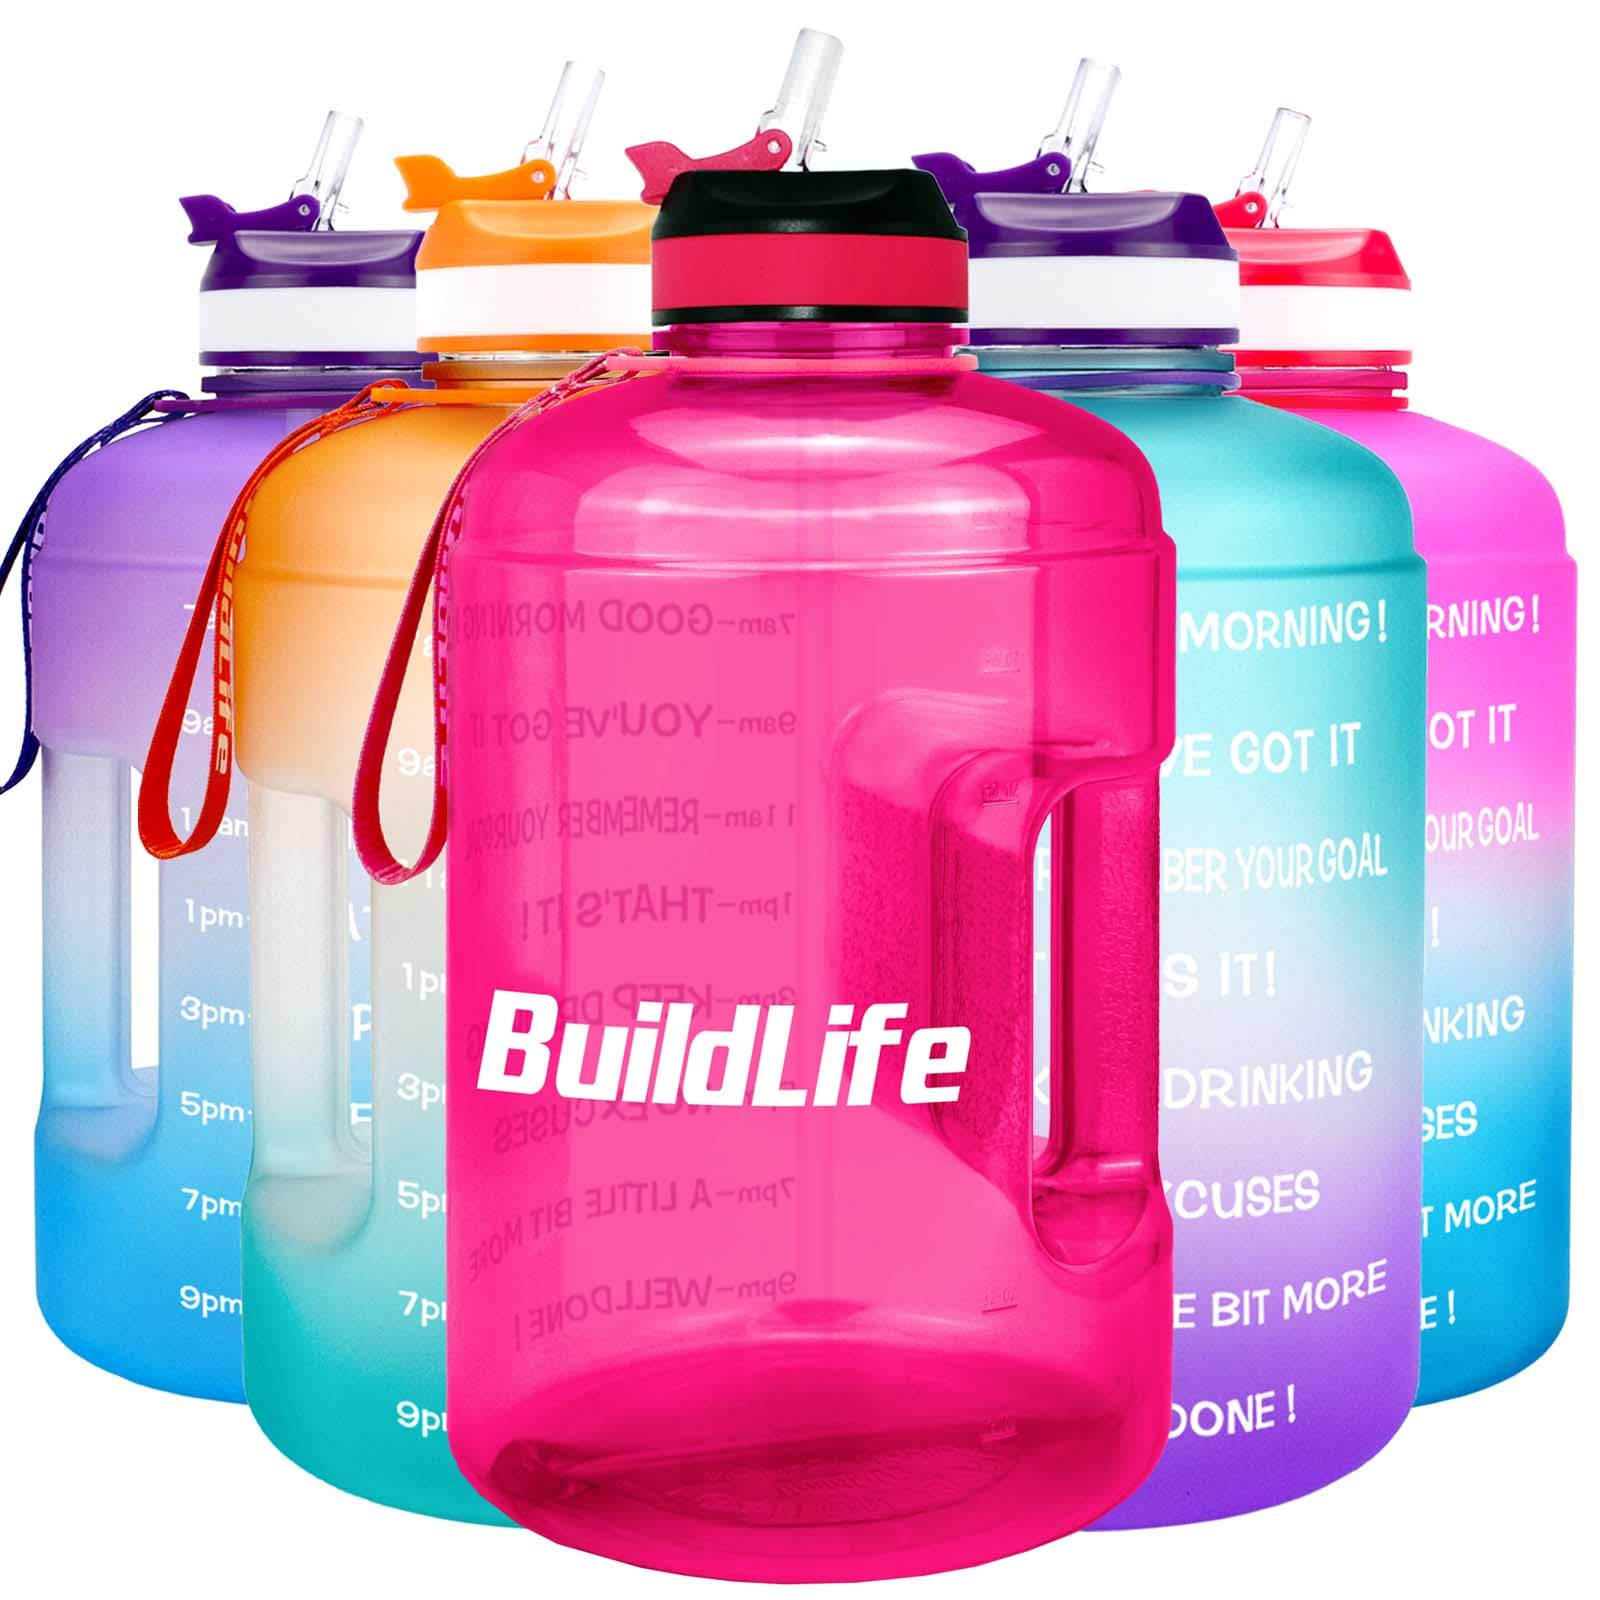 BuildLife gallon Water Bottle with Straw - 128oz Large Water Bottles with  Times to Drink More Daily - BPA Free Motivational Wate